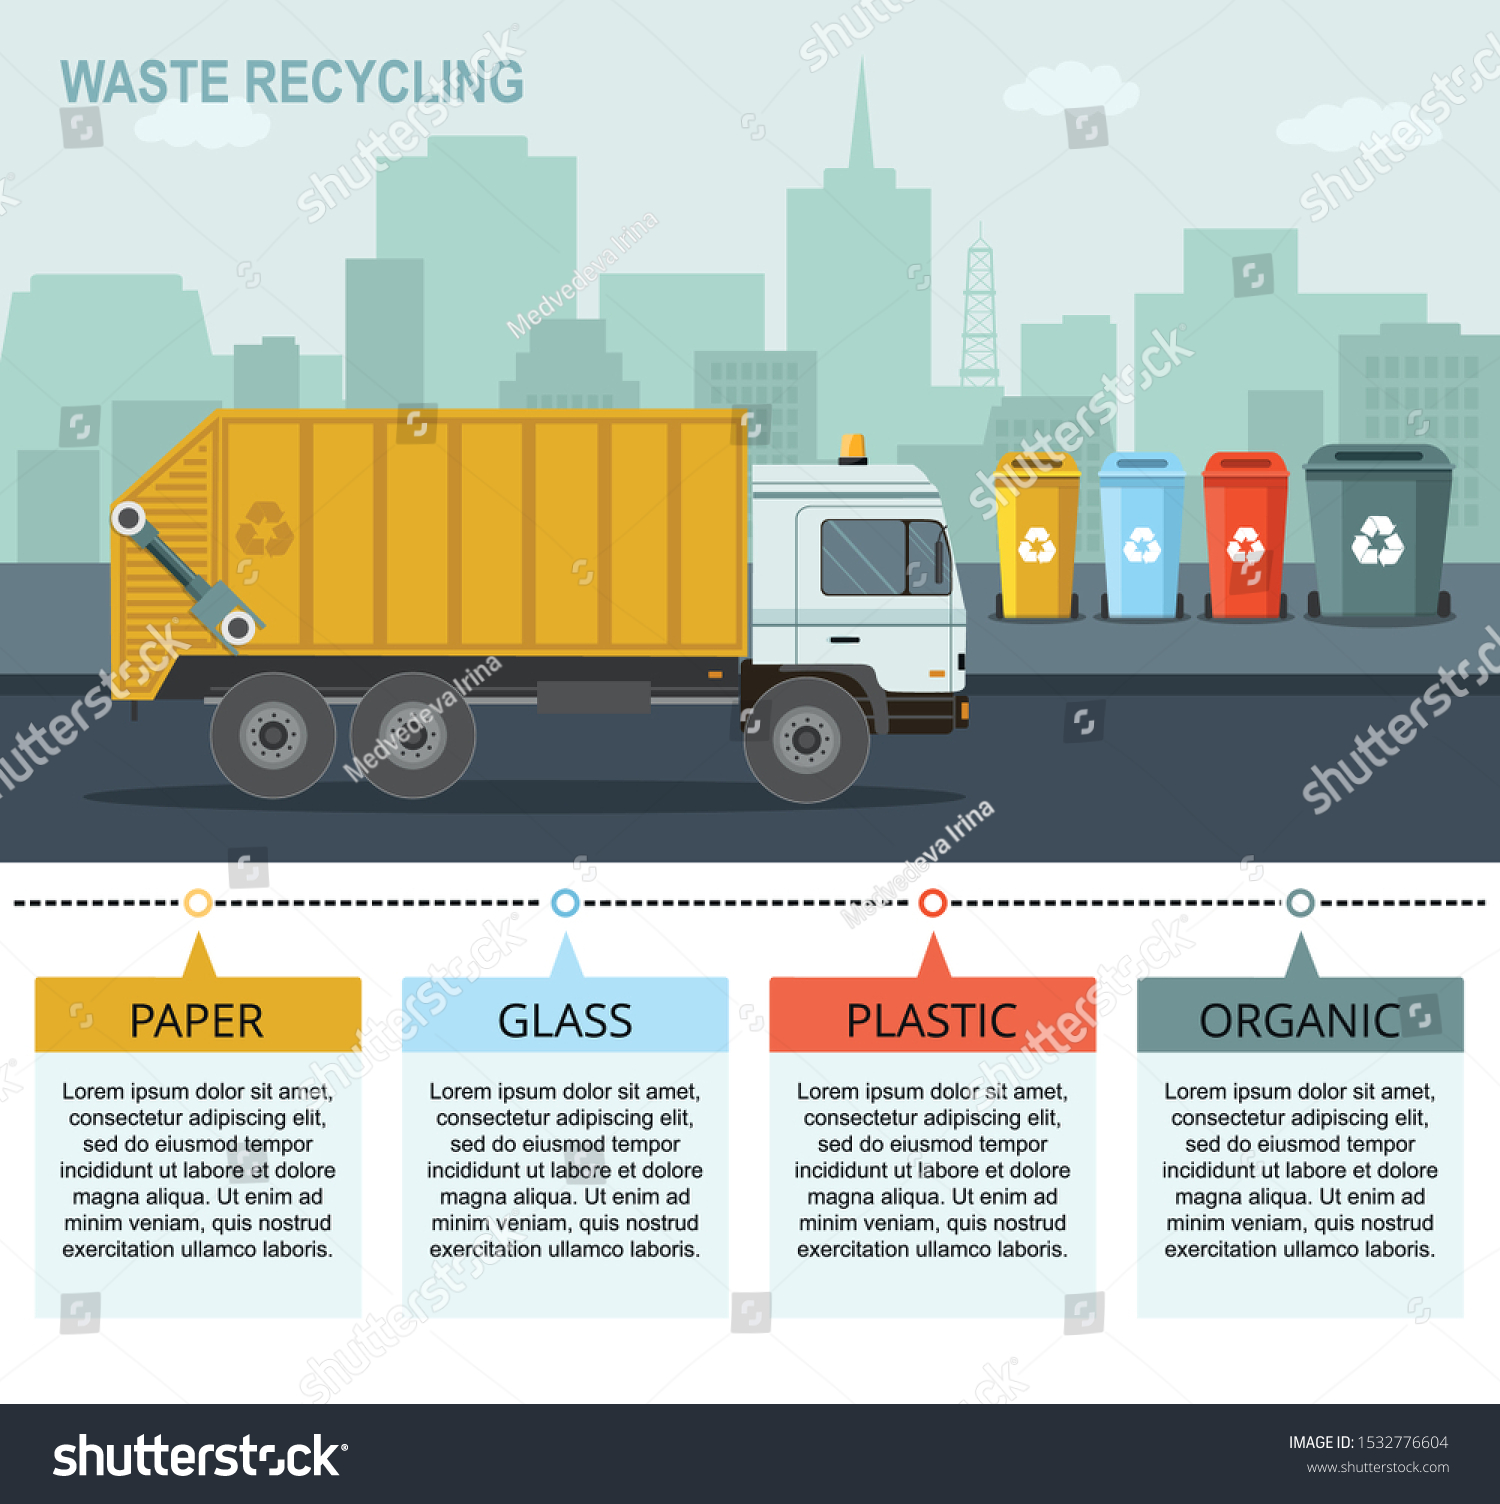 SVG of Garbage truck picking up recycle trash bin. Rubbish bins for recycling different types of waste on city background. Vector infographic svg